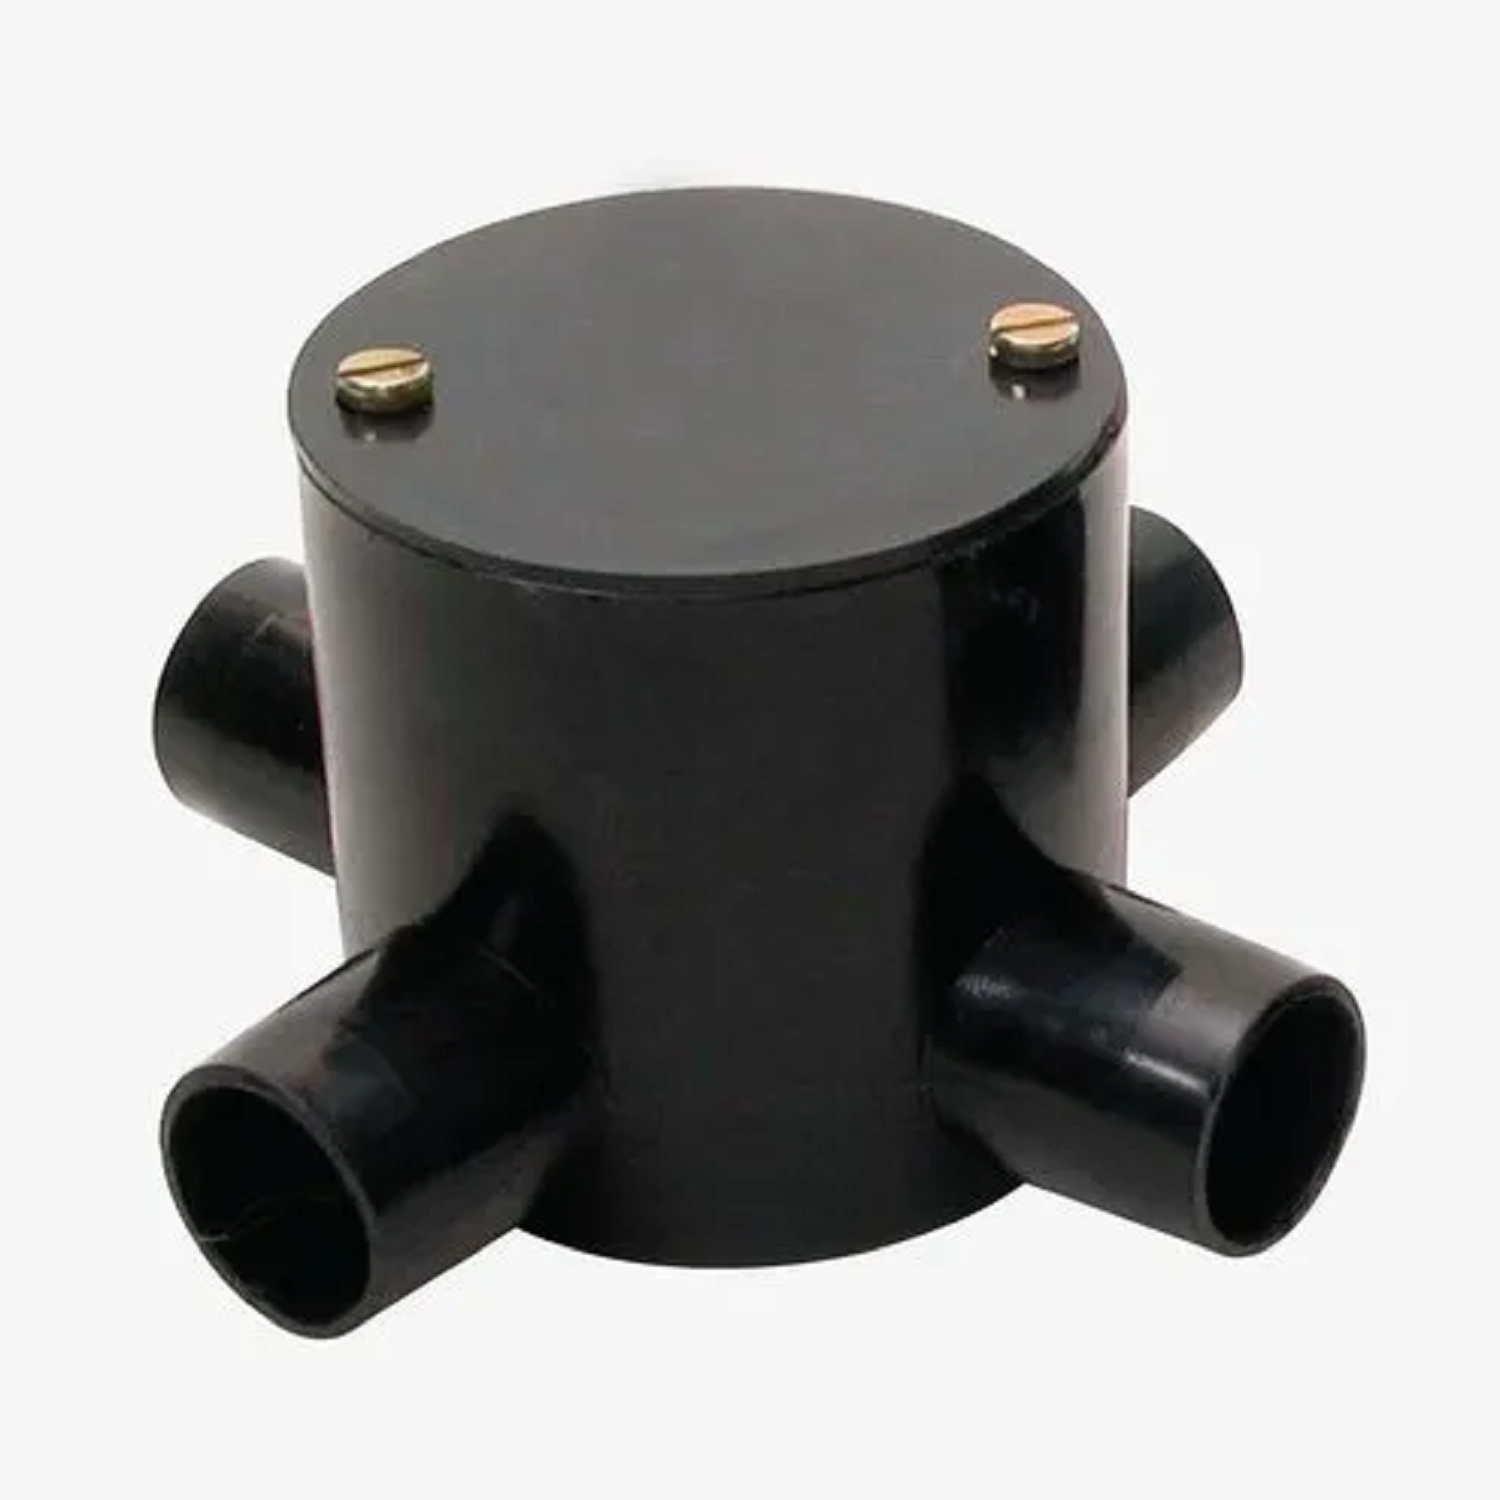 25 MM Precision Four-Way Deep Junction Box Black And Heavy Duty